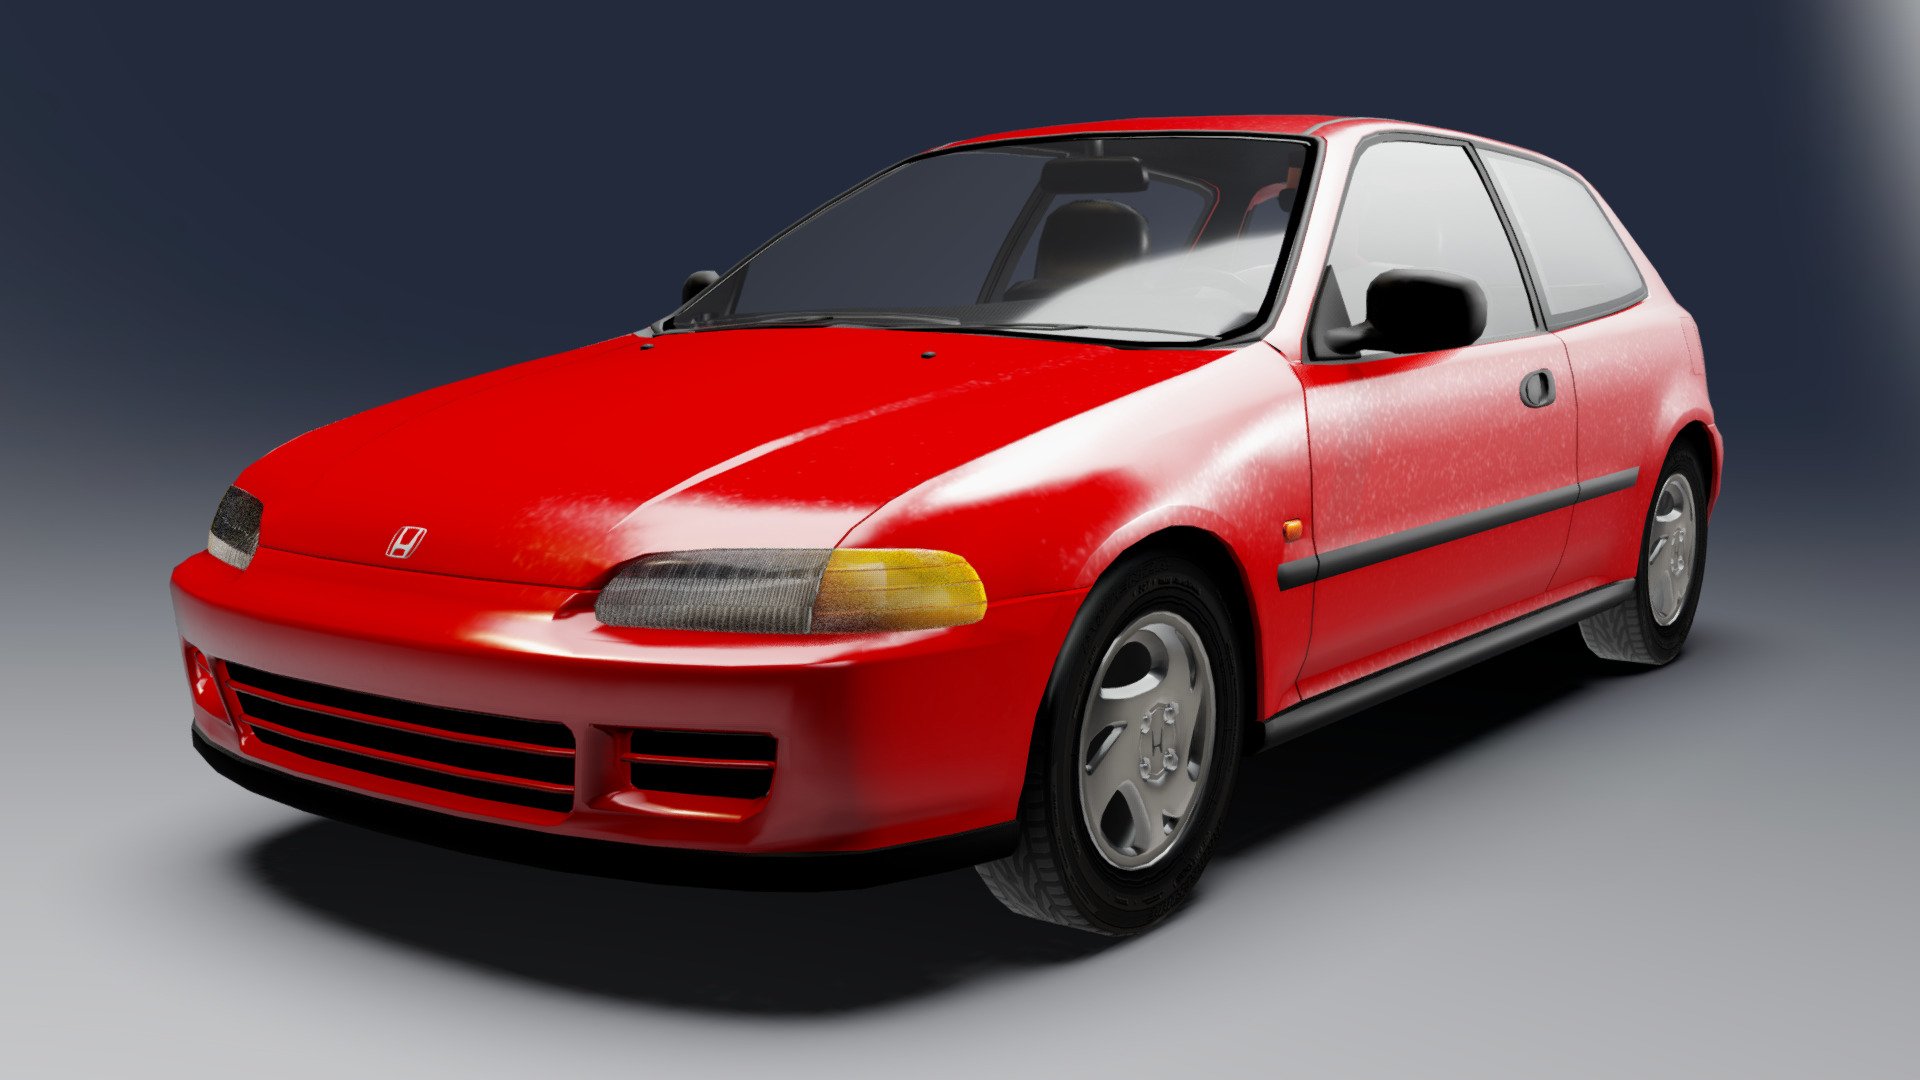 Finally I have updated, if not, remade my most popular model on sketchfab.
New front, rear and even sides, little to no mesh is the same as the original EG6 3d model